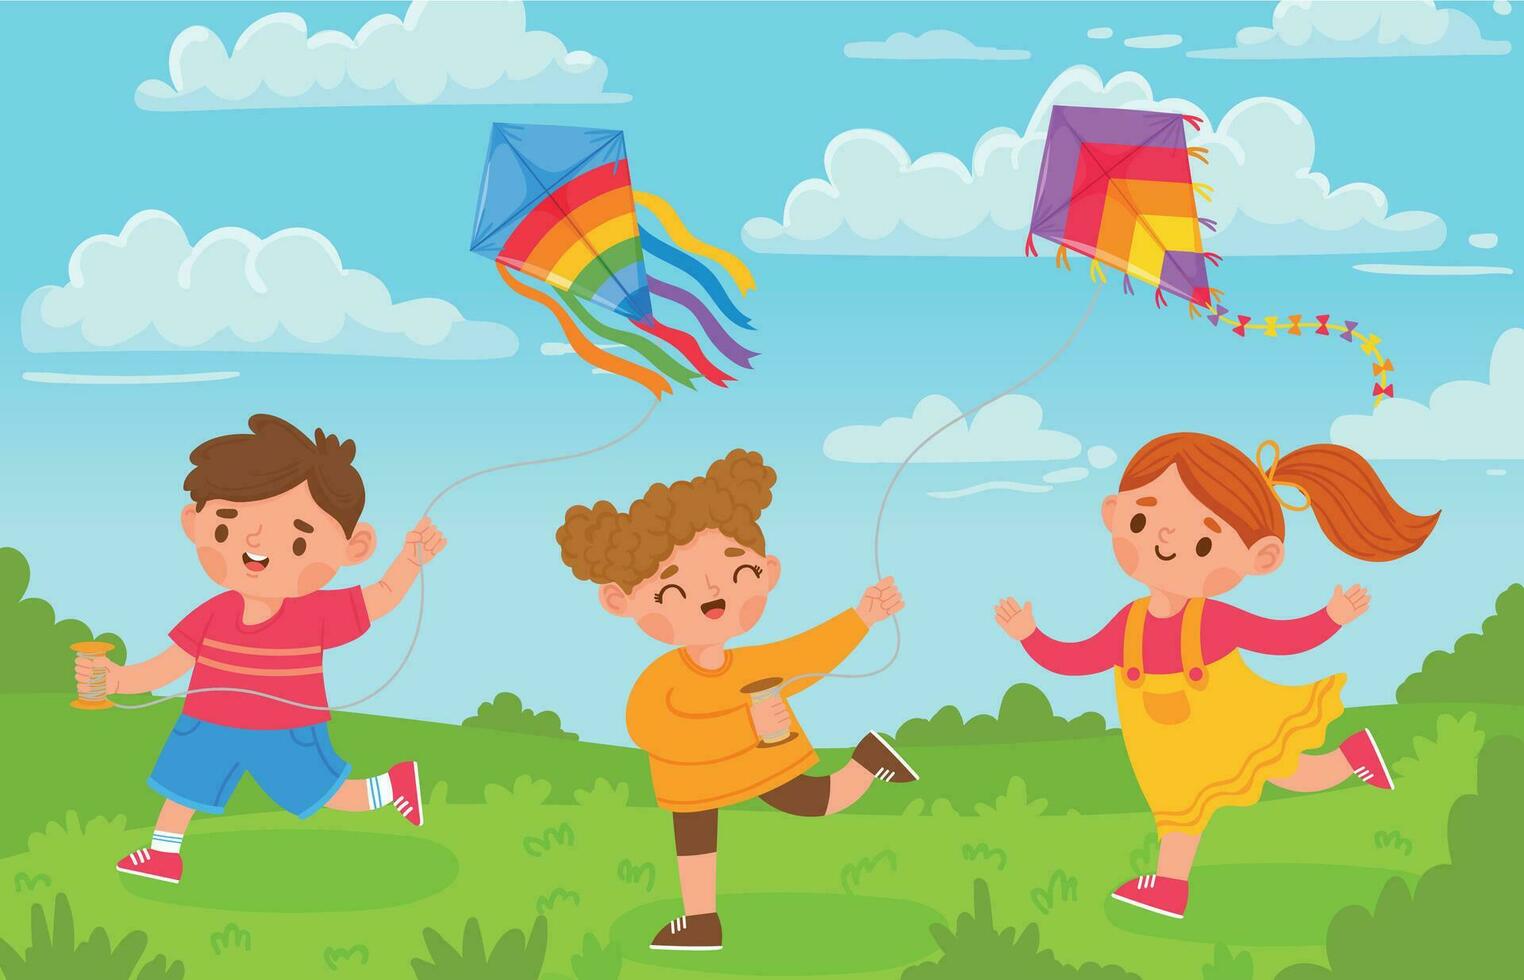 Kids with kites. Boy and girl outside playing with flying toy in park. Cartoon children and kite in wind sky. Summer activity vector concept